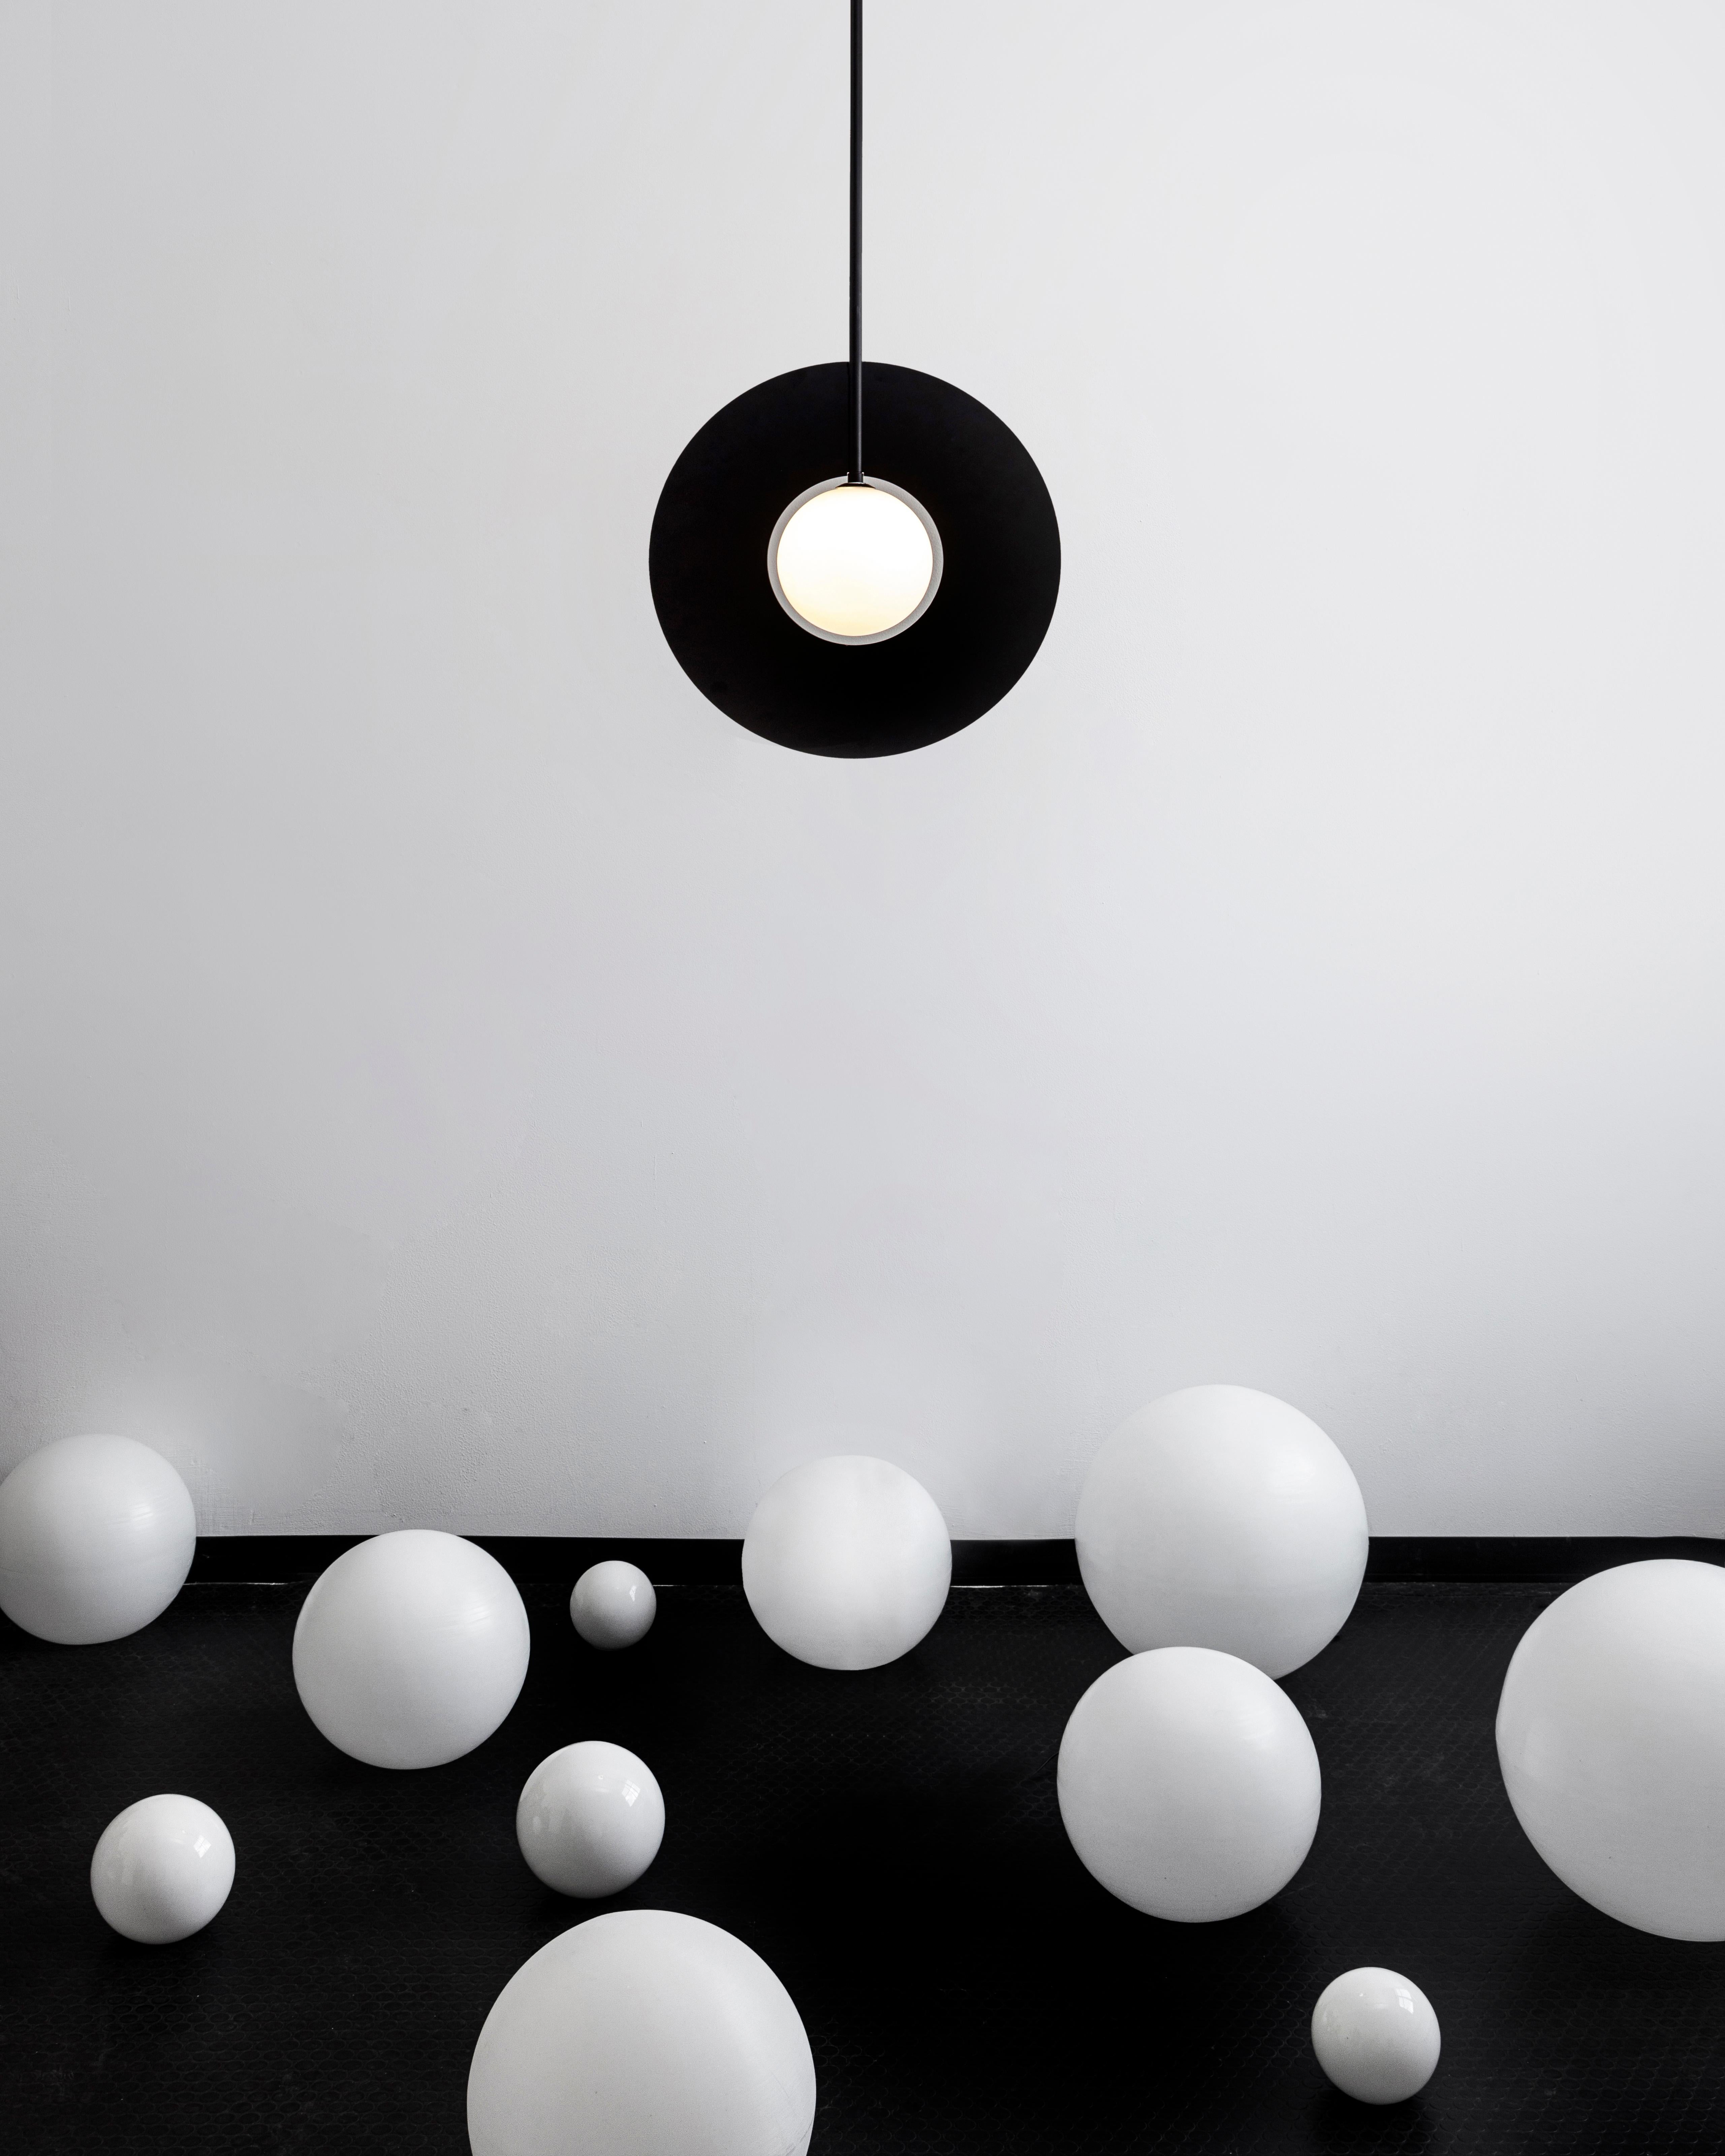 Saturn has always interested me, and it was only natural that the shape of the ring and its circle would inspire the new lighting collection.
Looking at the front view, it is difficult to understand the play of light that passes through the